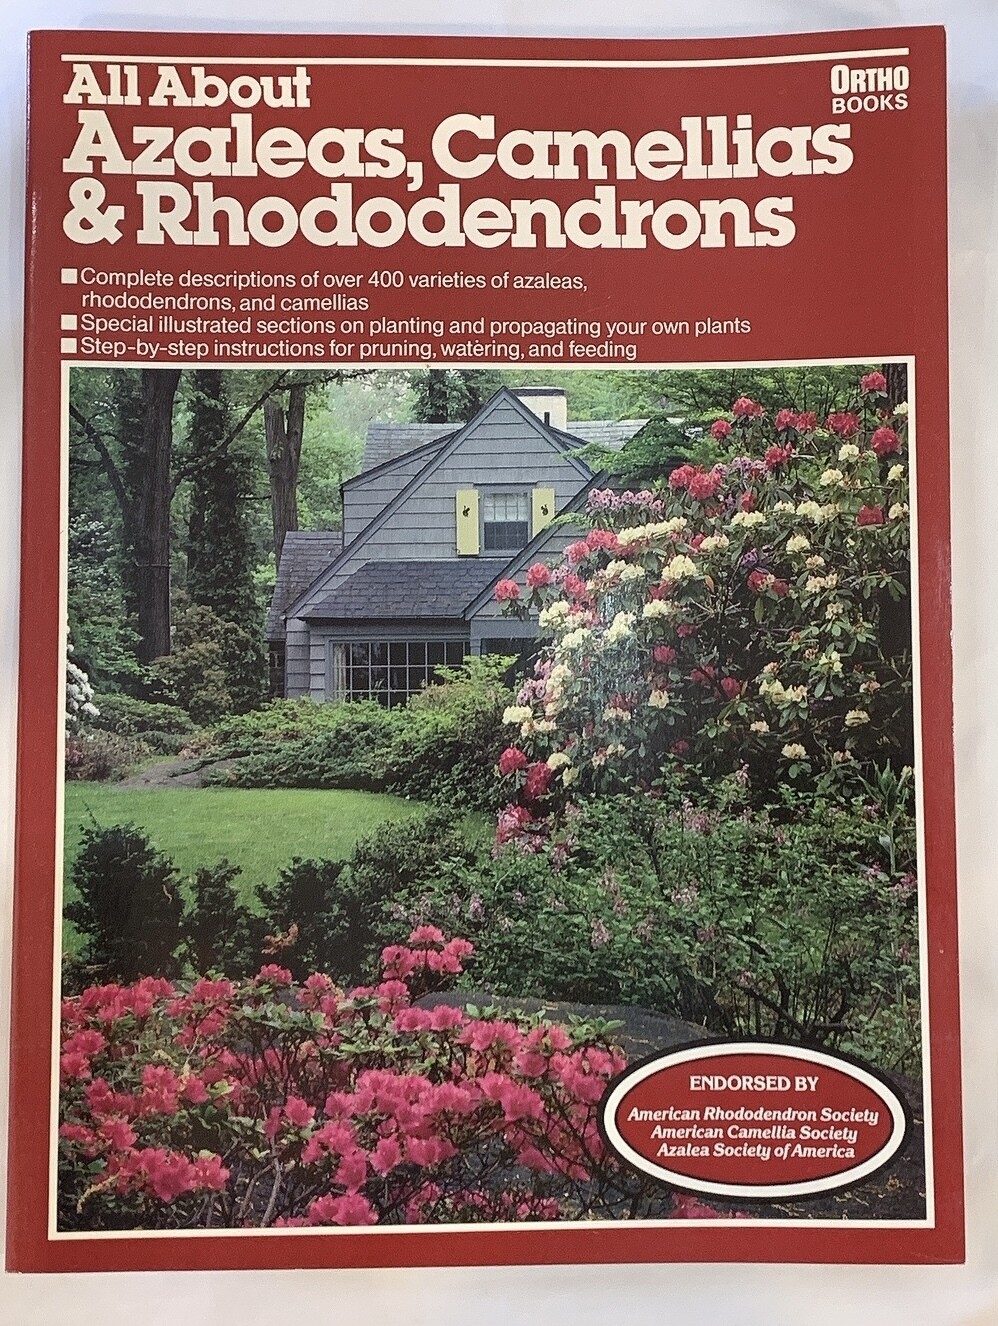 Ortho Books All About Azaleas, Camellias & Rhododendrons